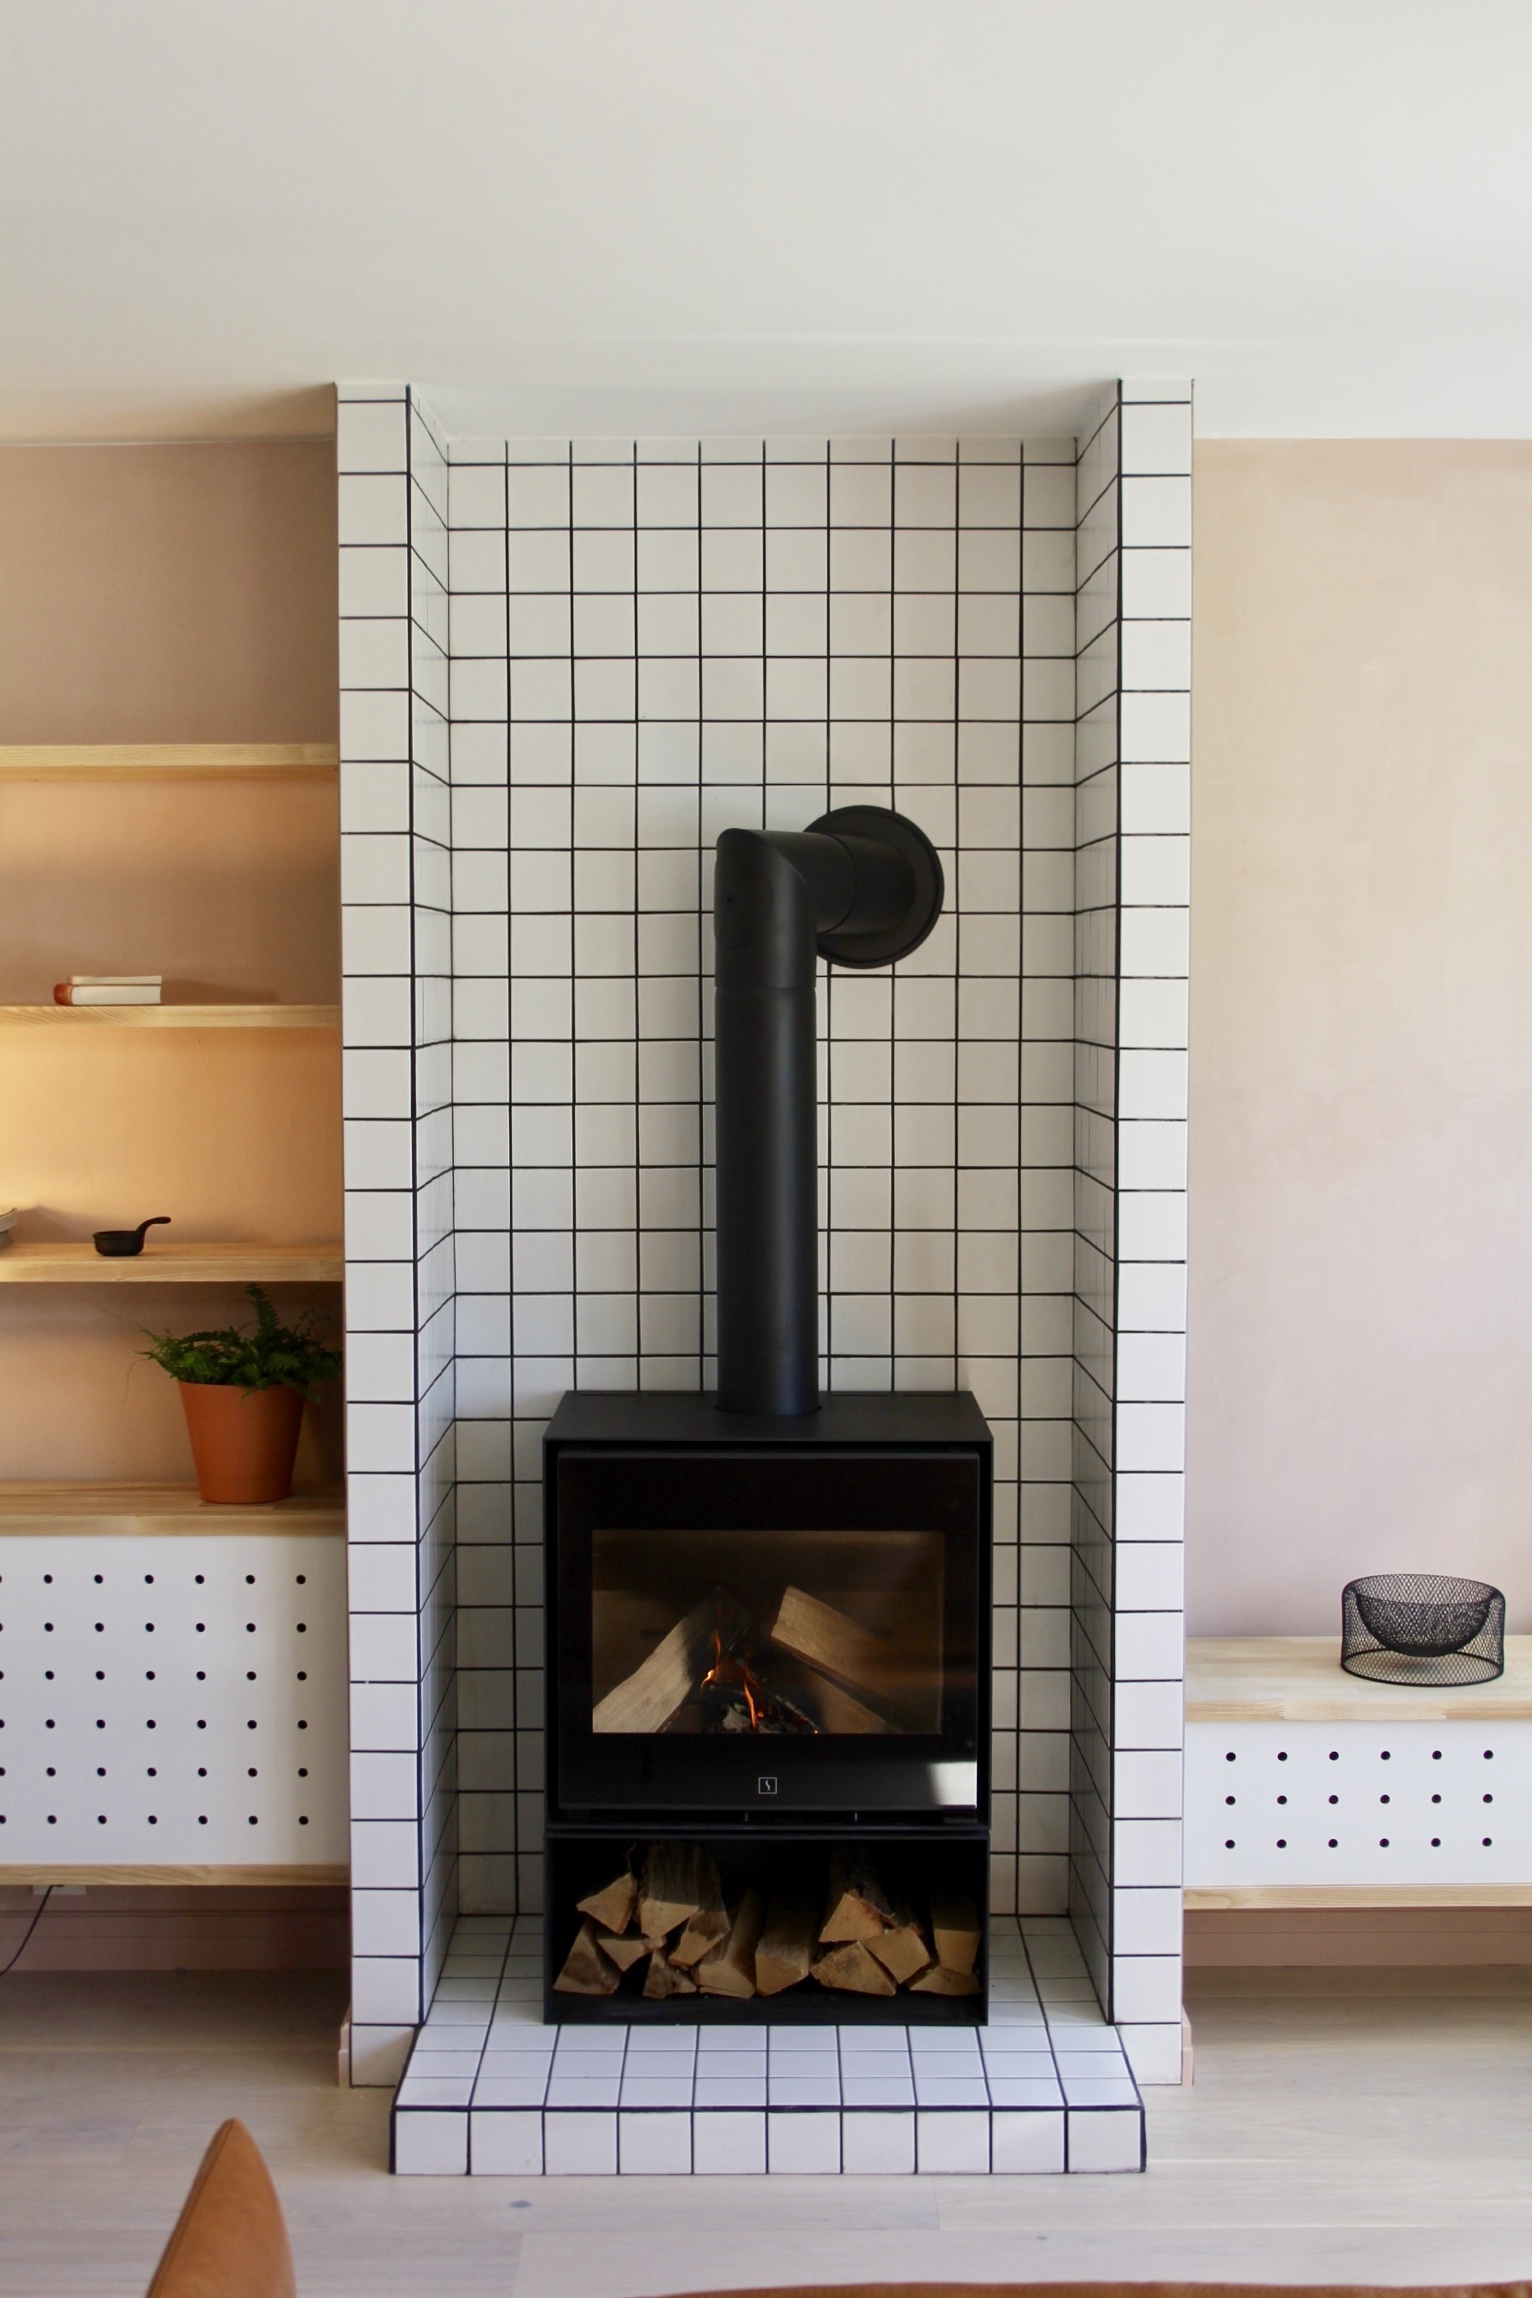  A fireplace was installed surrounded with white tiles, the same as in the kitchen,&nbsp;&nbsp;to protect the surrounding shelves and furniture. 